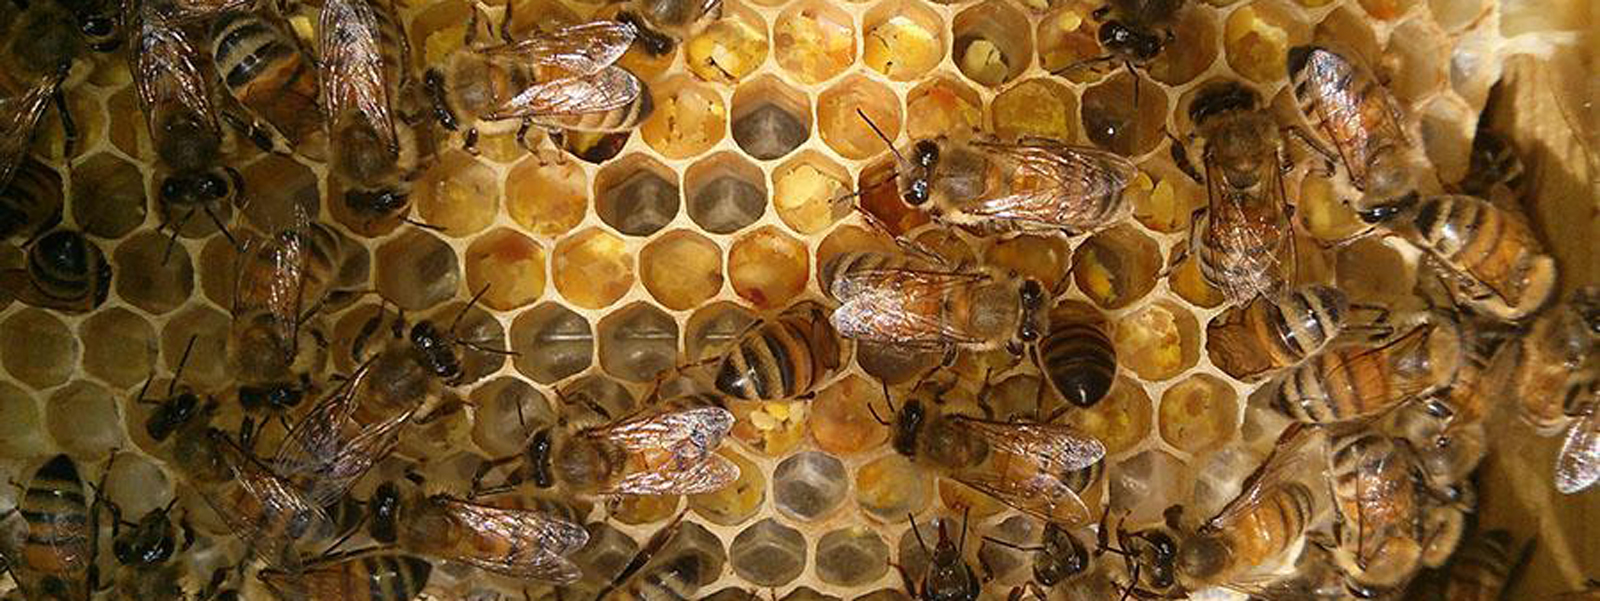 How Do Bees Make Honey? It's Complicated